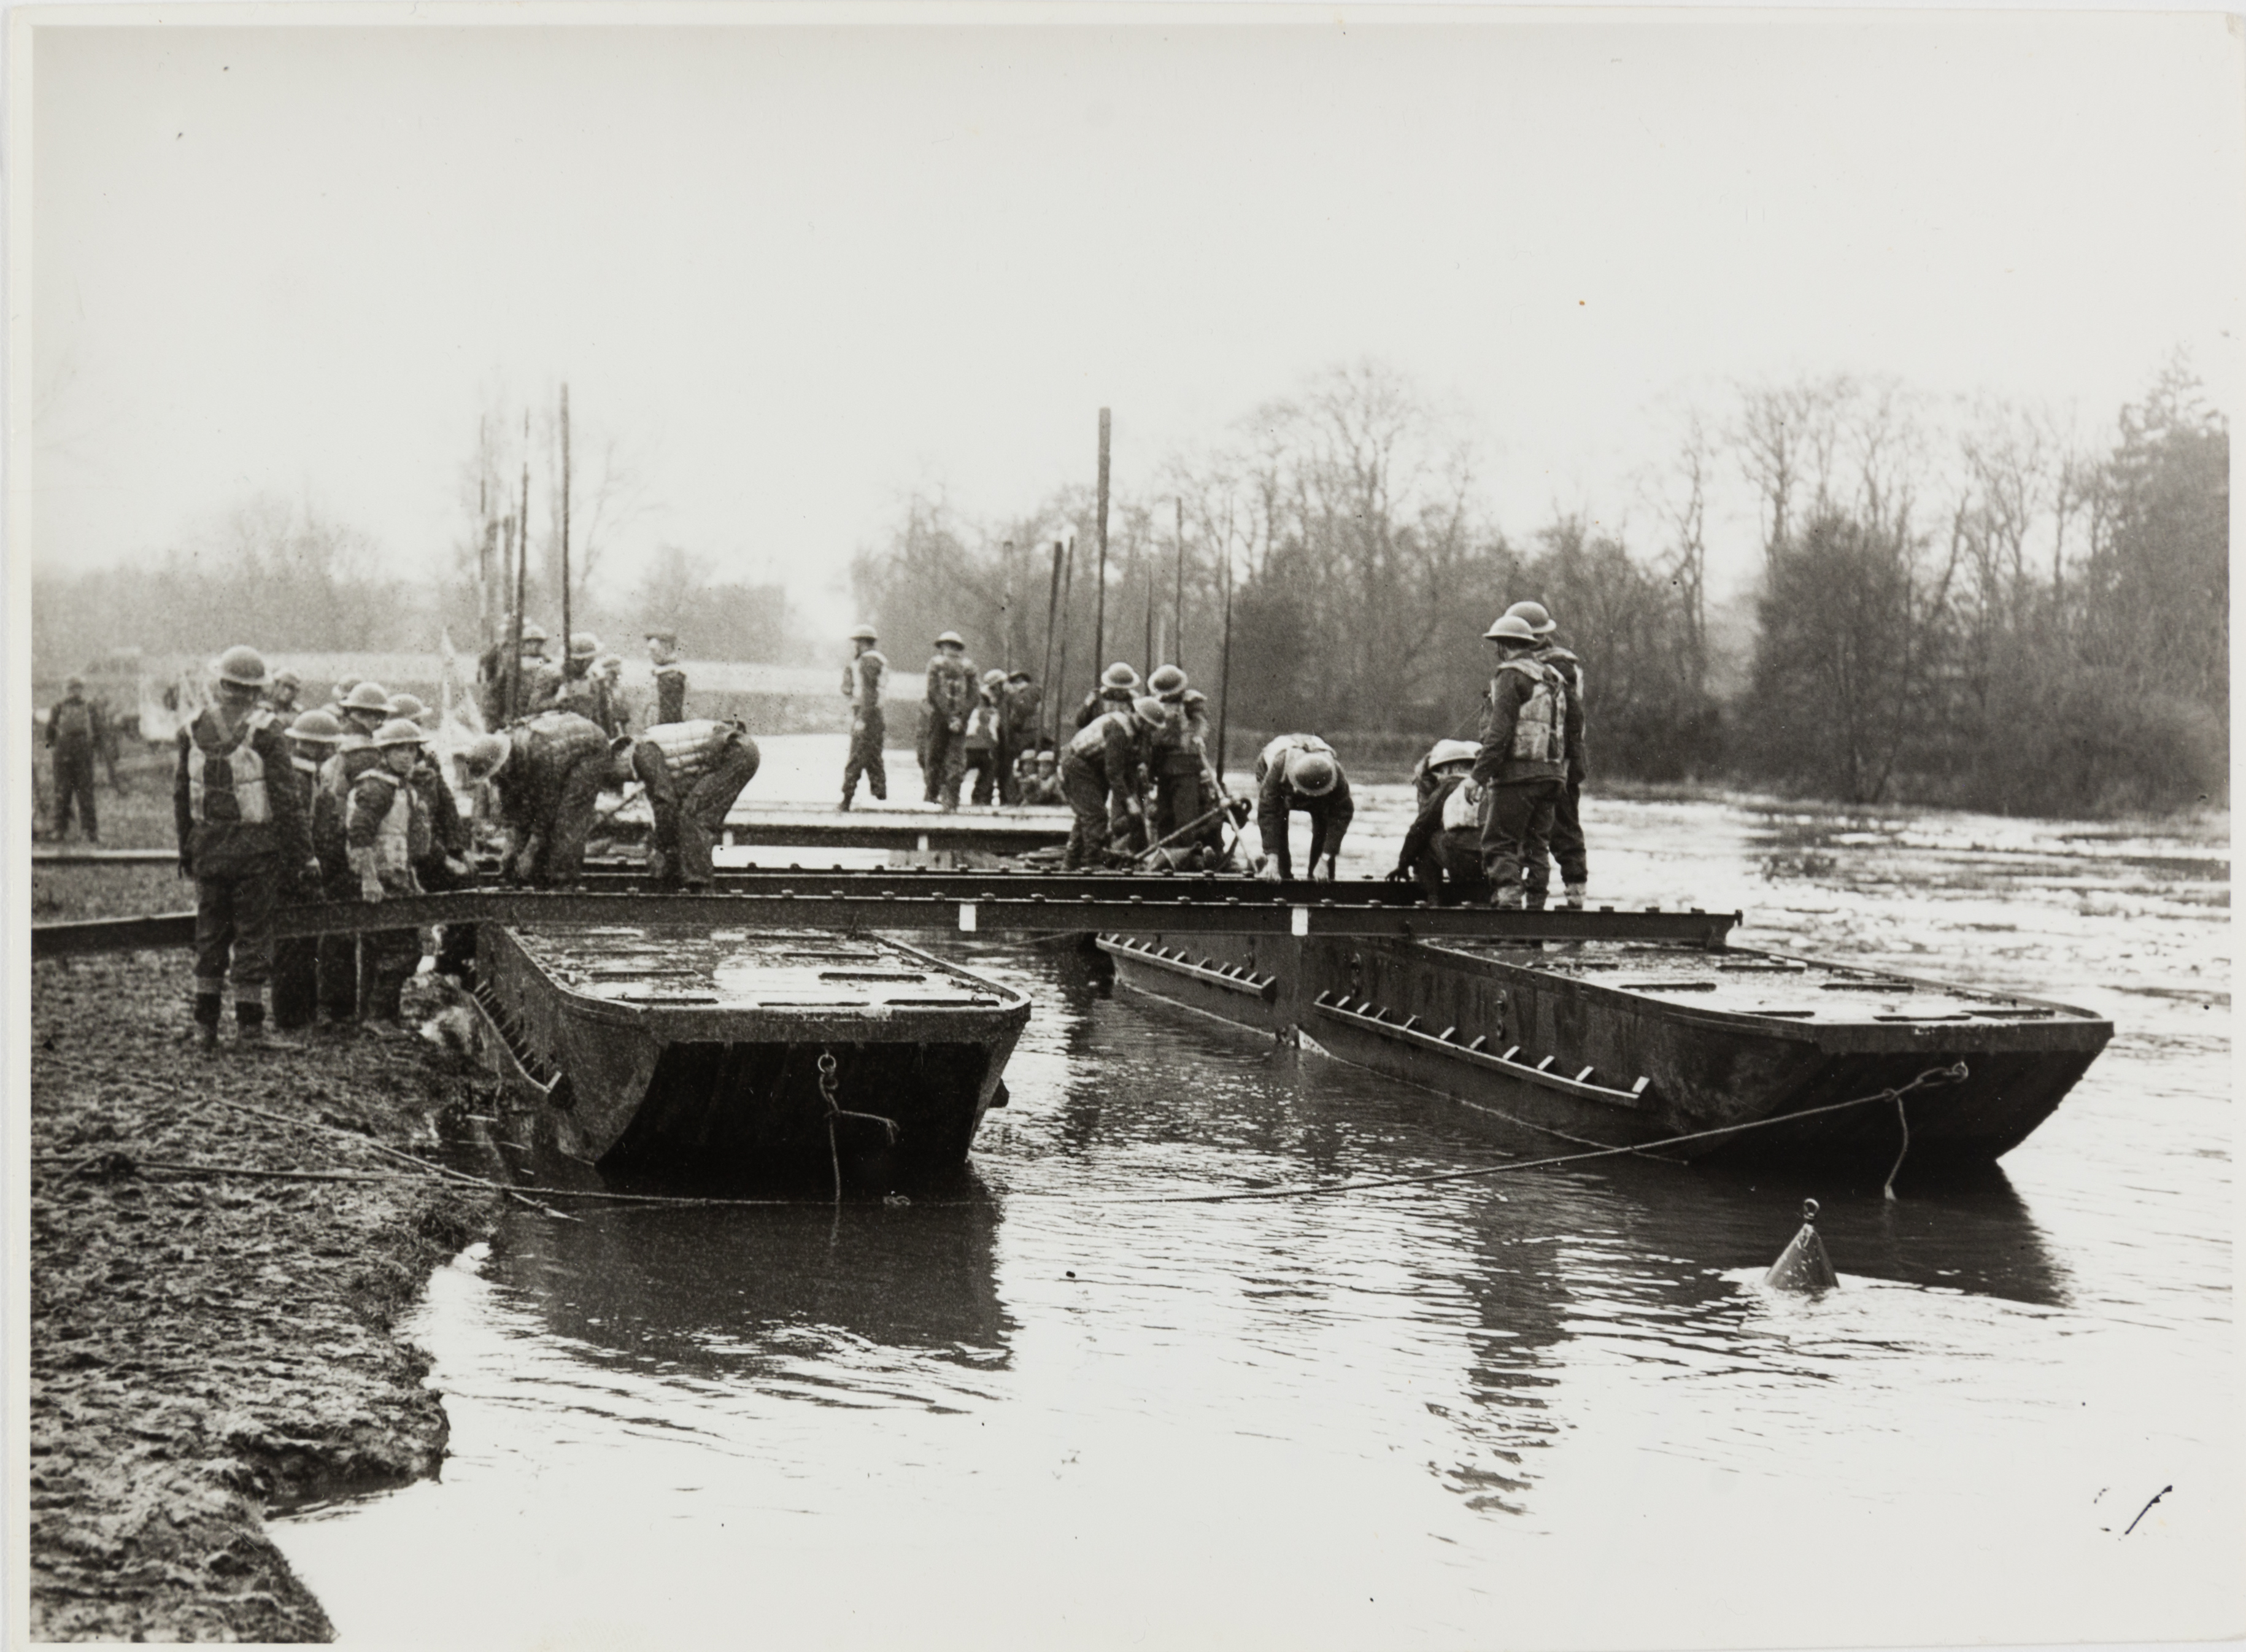 Black and white photograph of several soldiers standing and sitting on moored landing crafts in the Thames. There is a metal frame between two crafts with soldiers are attending to.